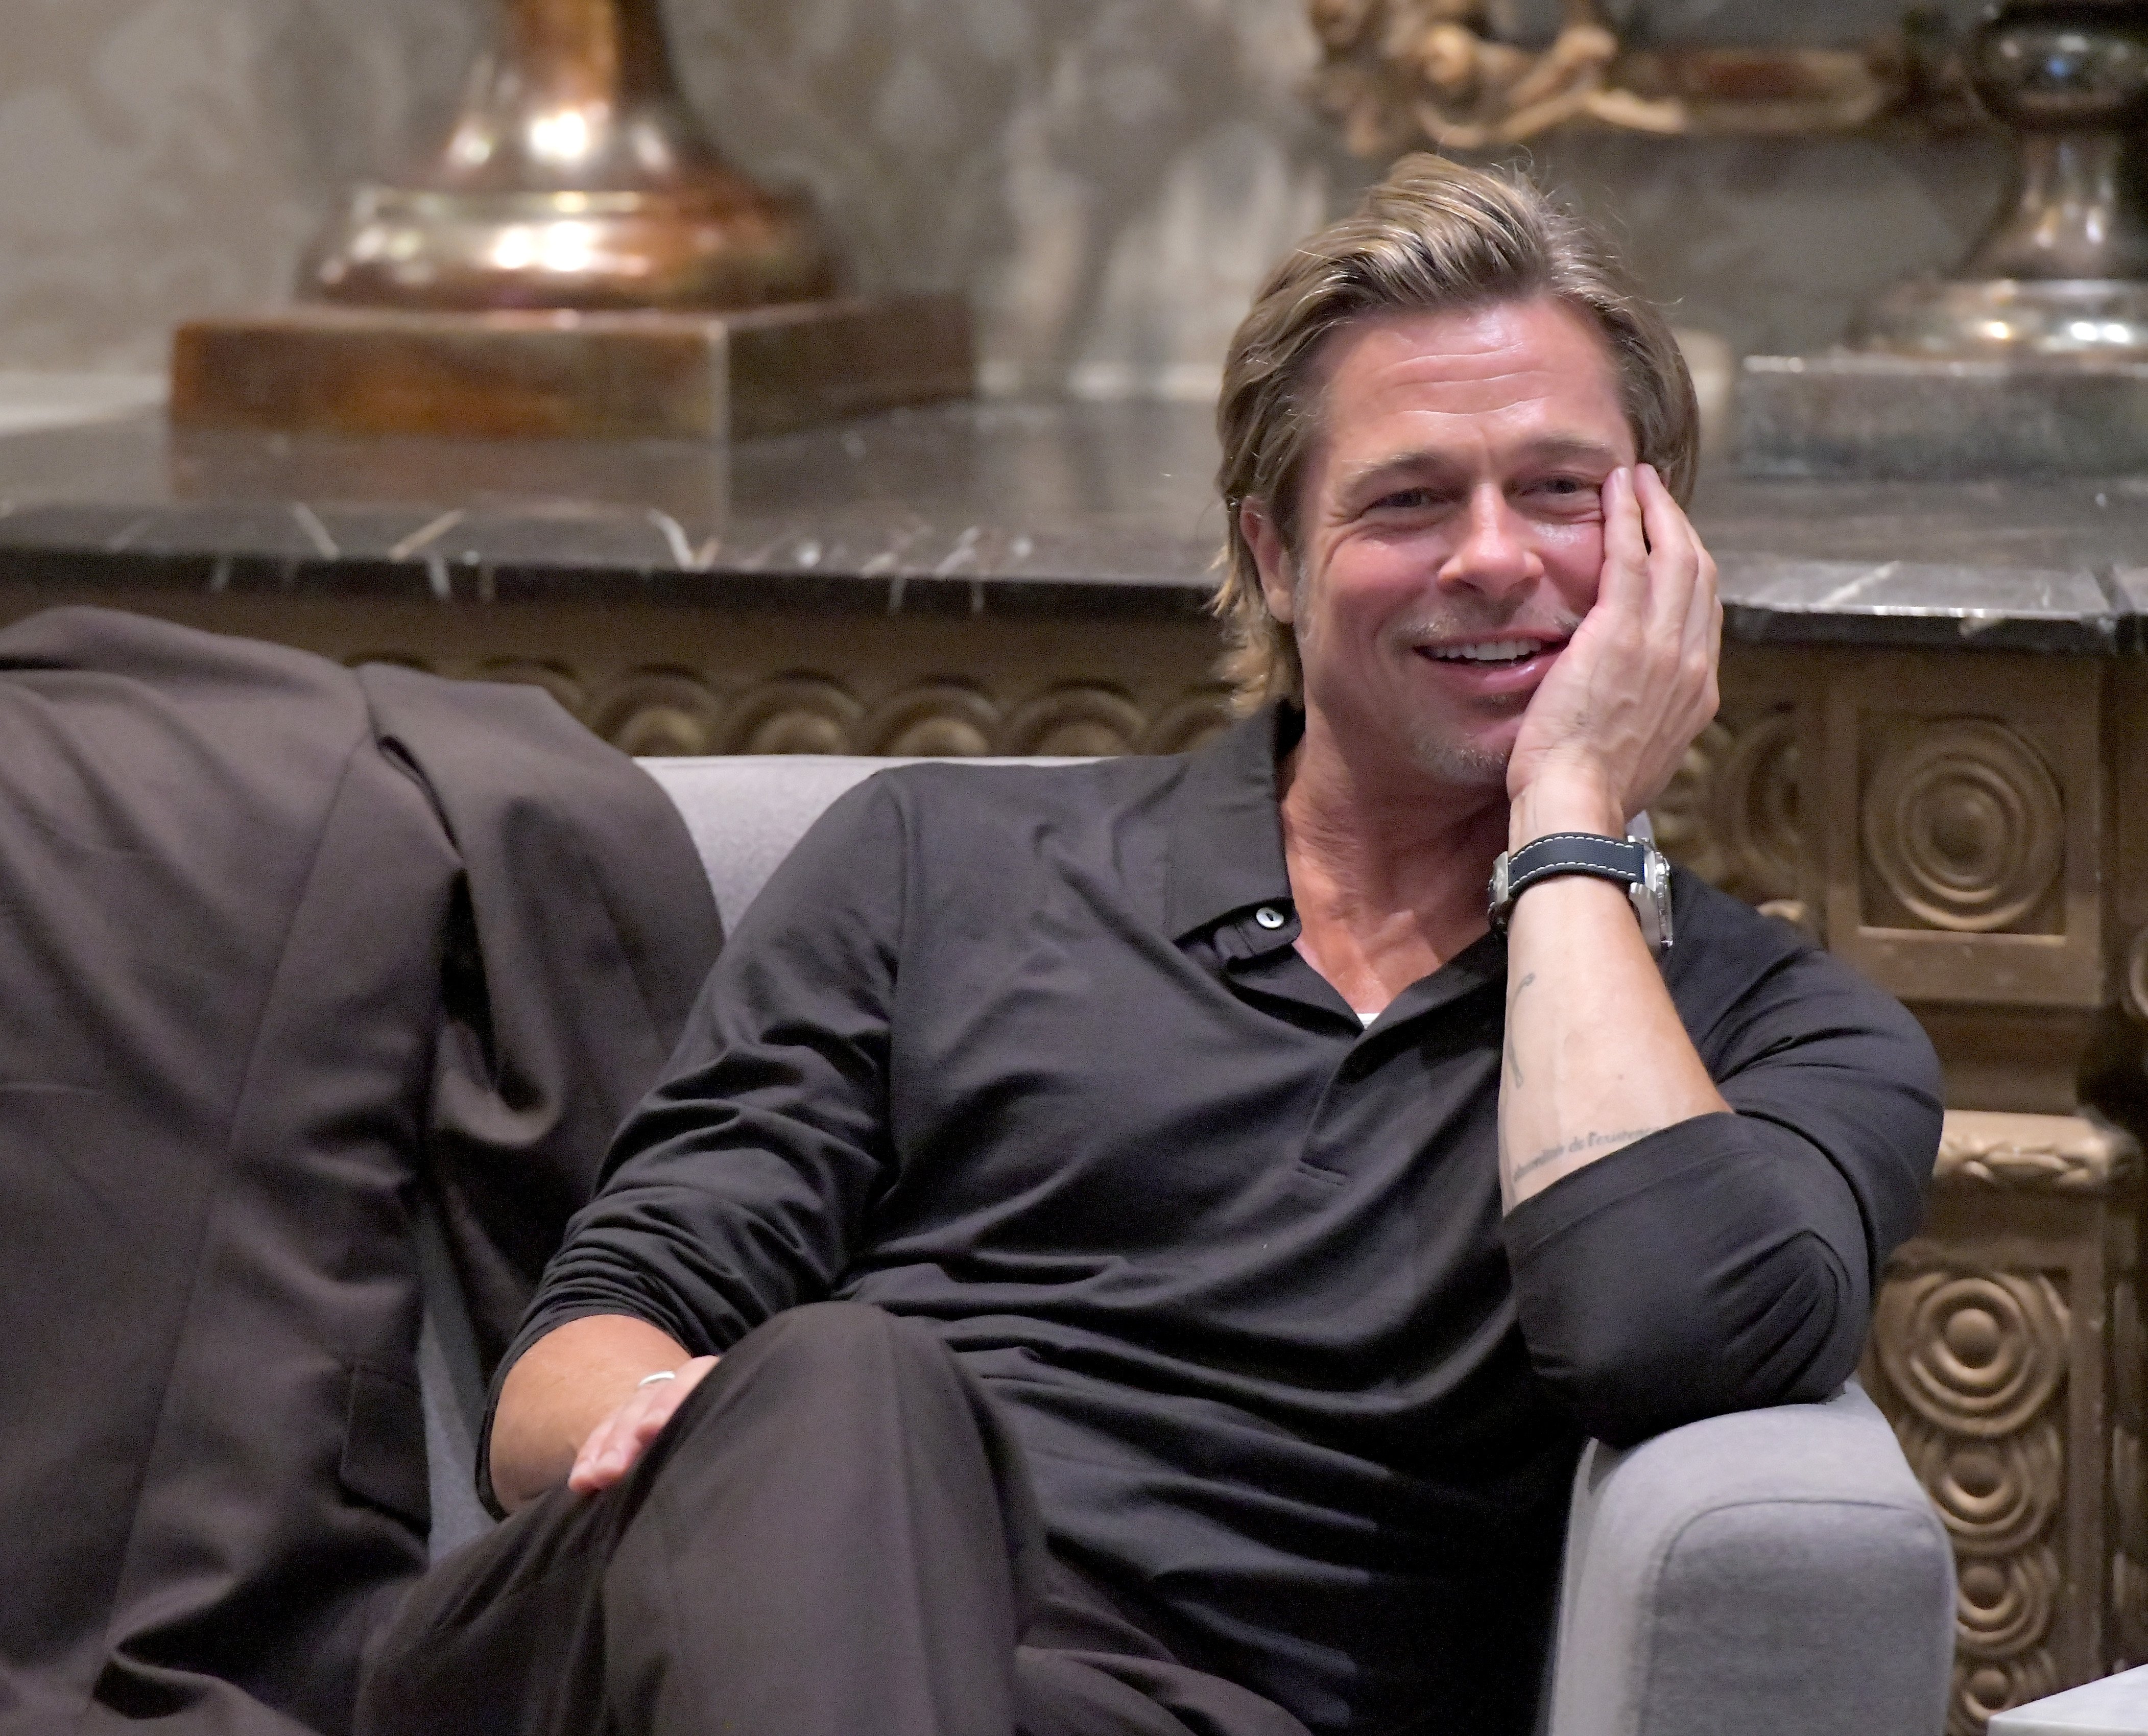 Actor Brad Pitt during the Breitling Summit on September 24, 2019 in Los Angeles, California ┃Source: Getty Images